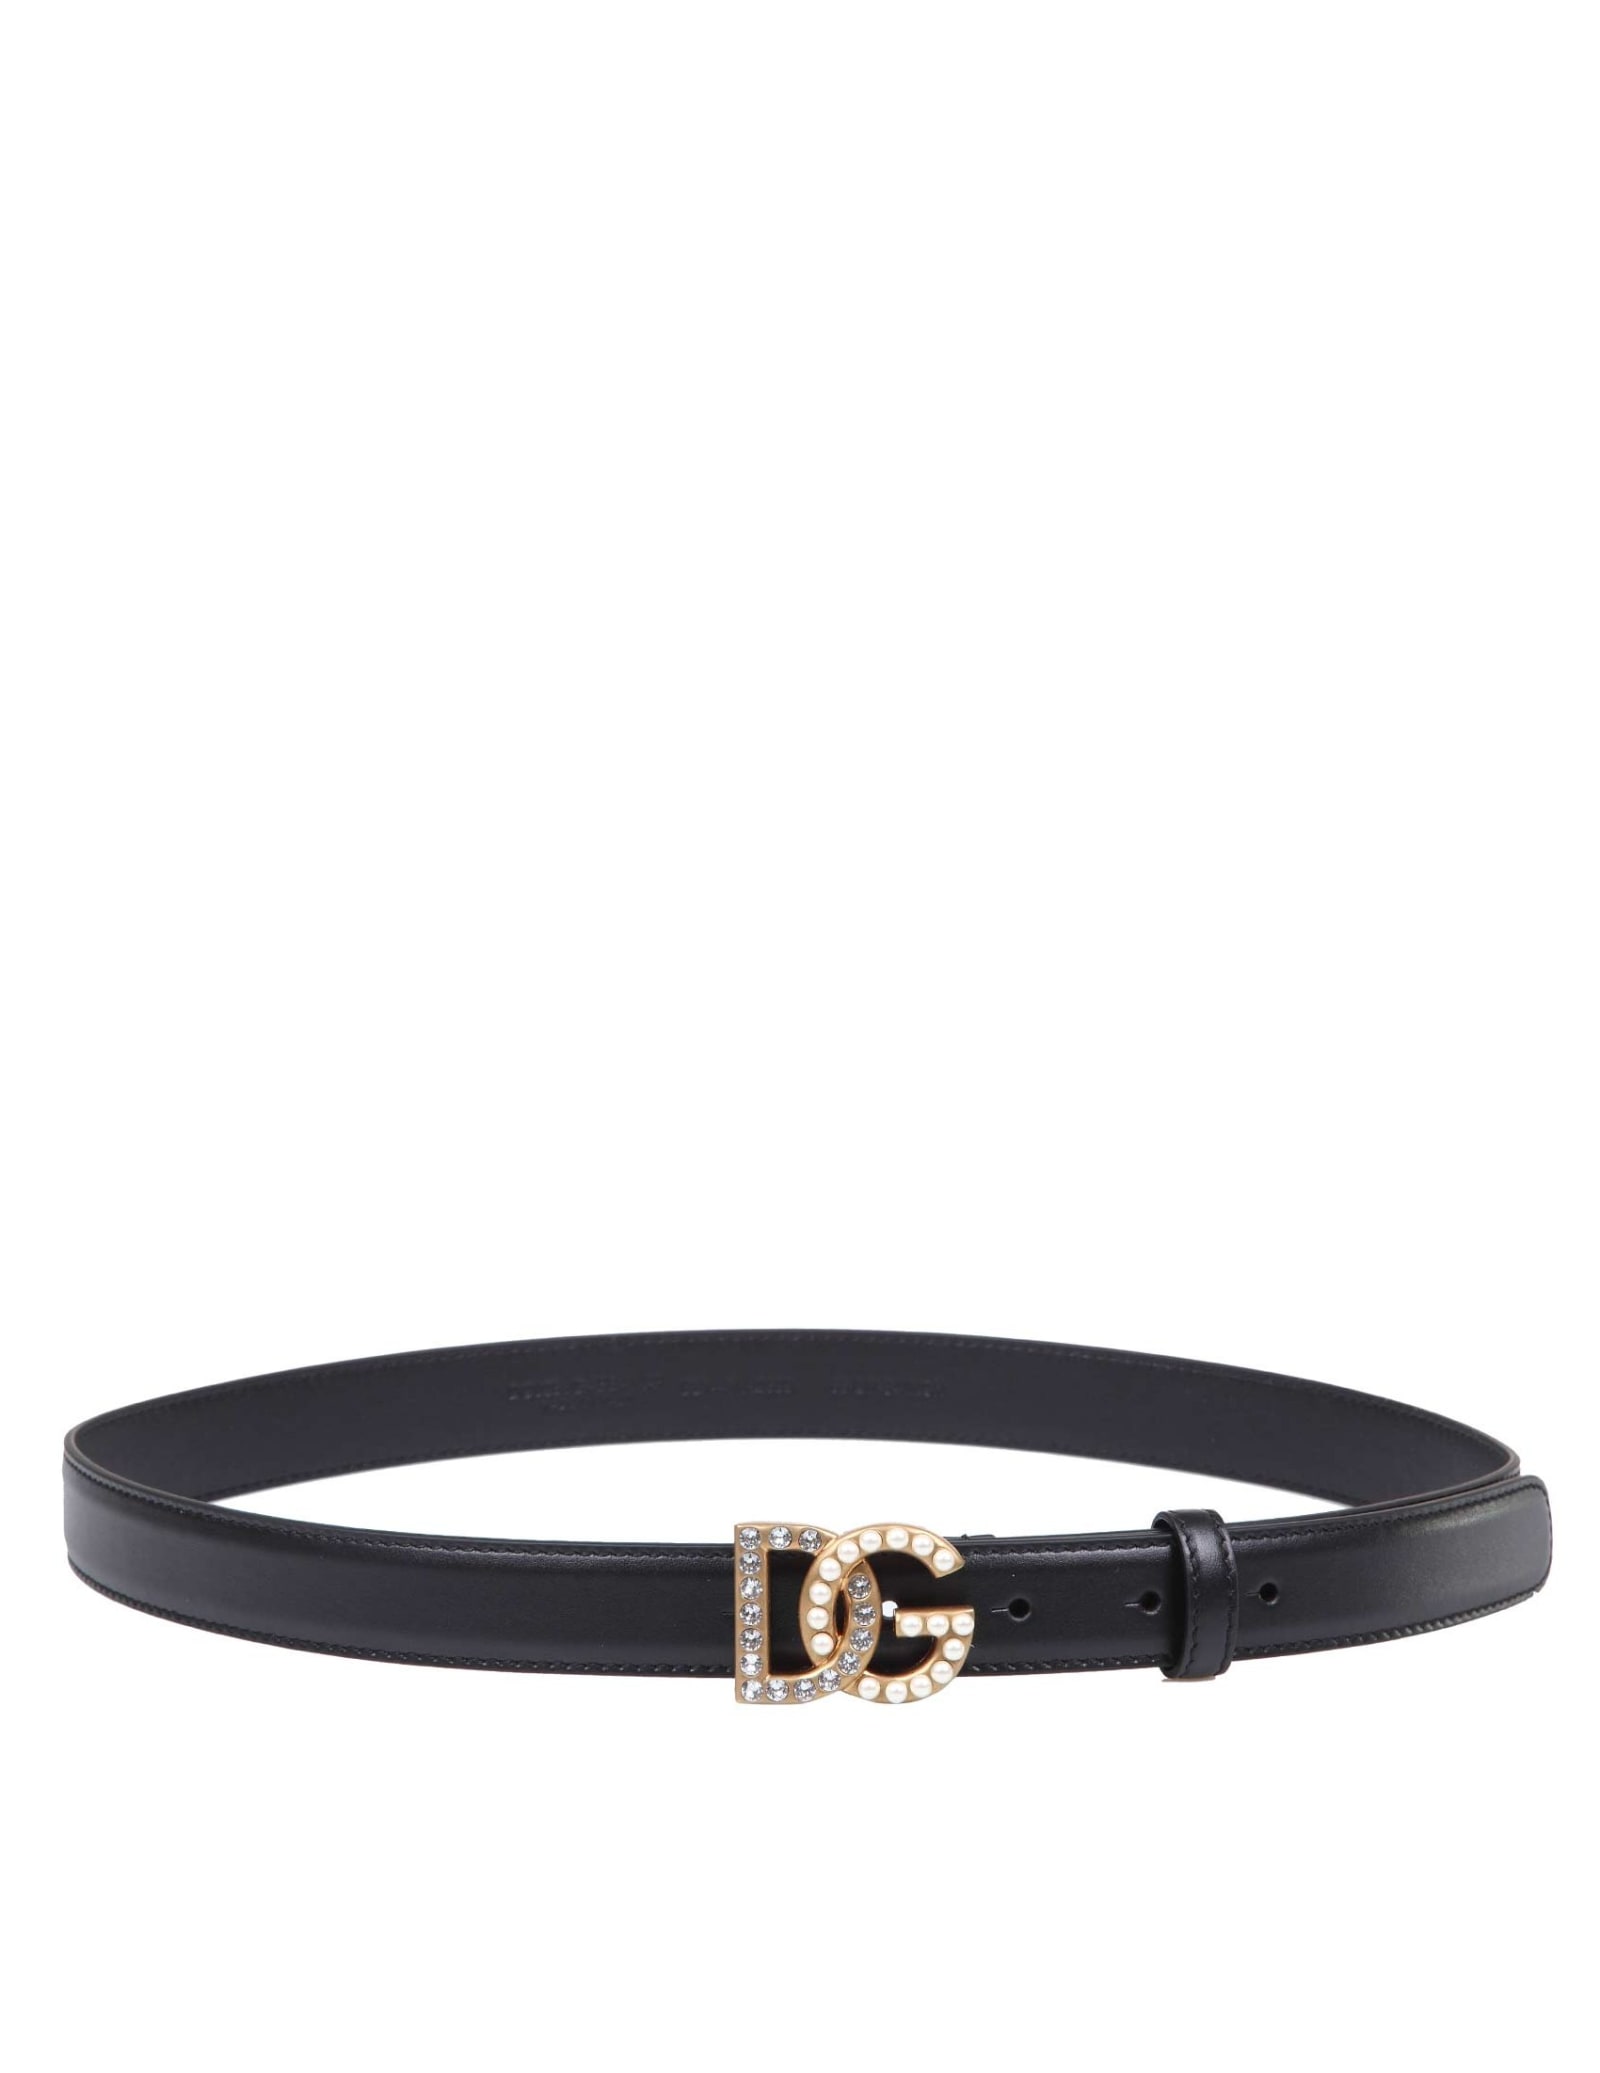 Dolce & Gabbana Leather Belt With Rhinestones And Pearls Logo